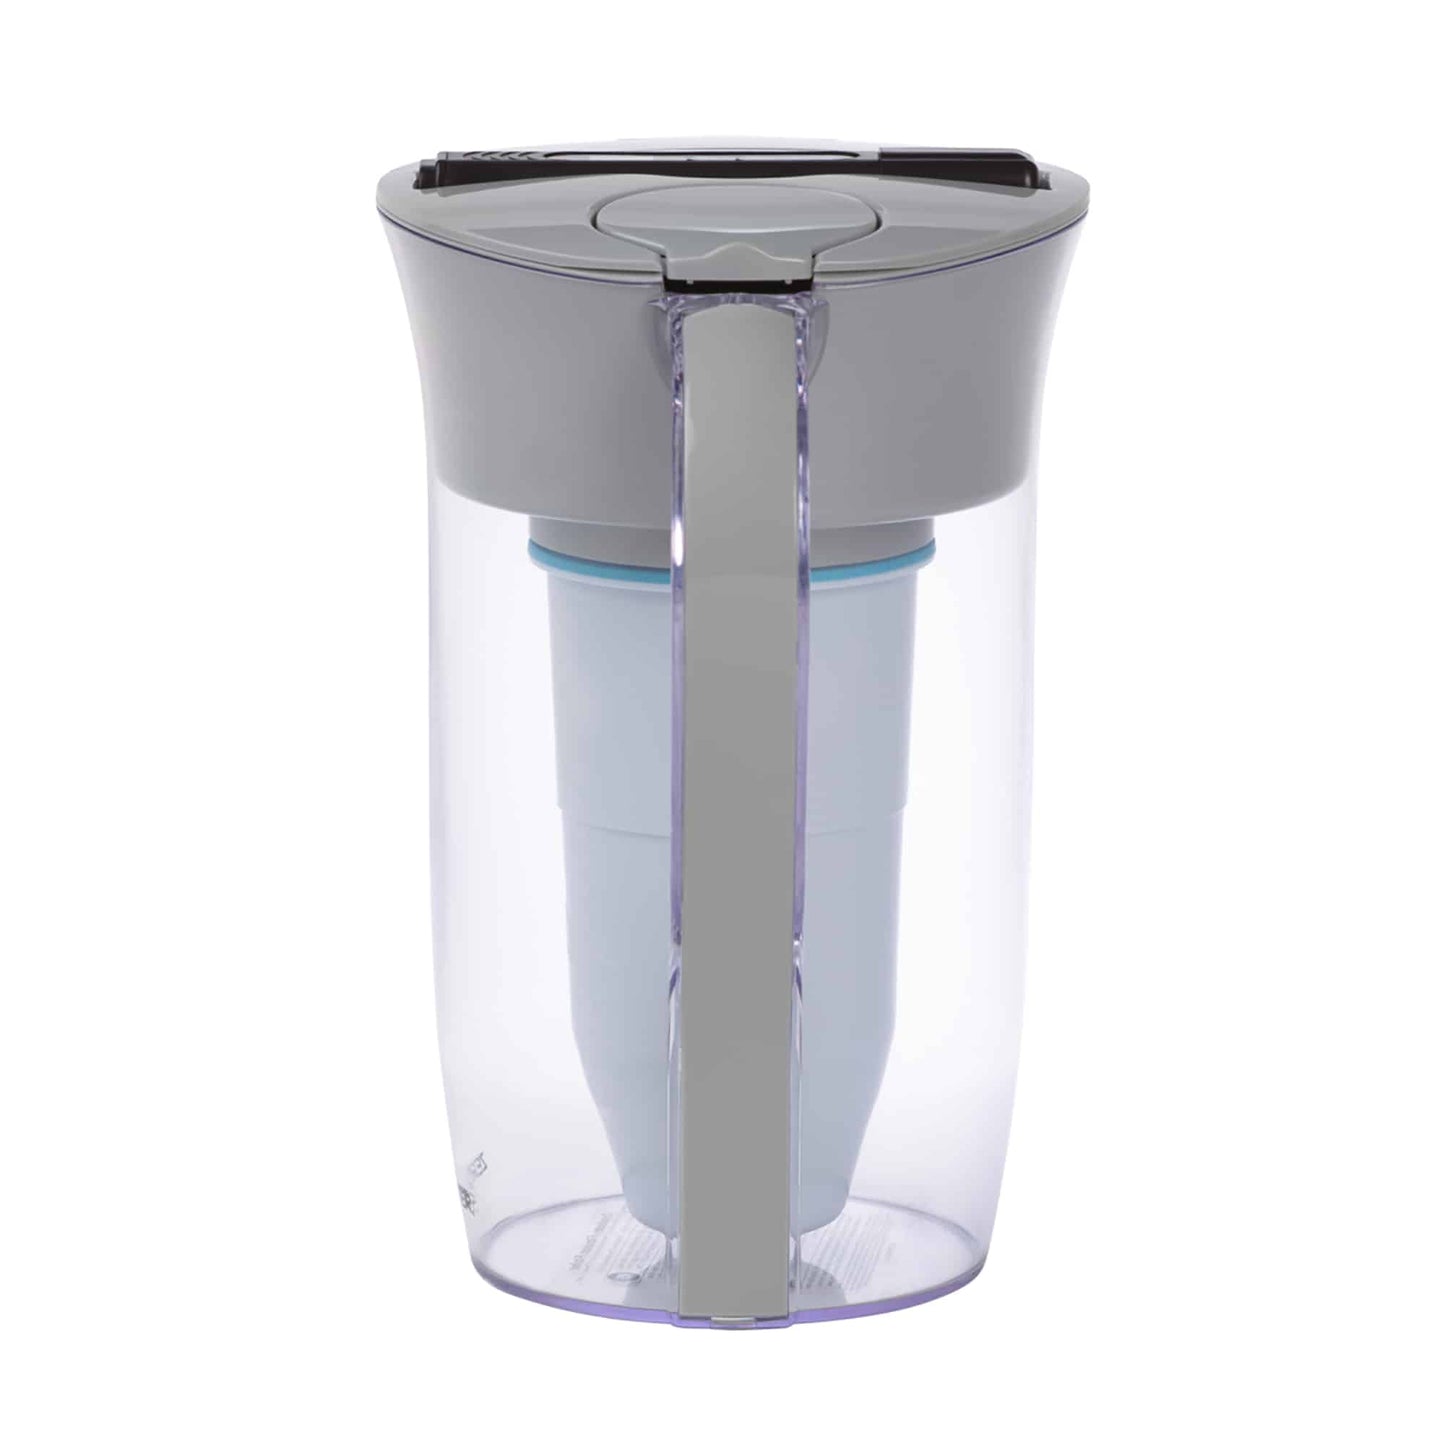 Combi-box: 1.9 liter round jug incl. 2 filters | Combi box 8 cup pitcher round (1,9 liter) + 2 filters